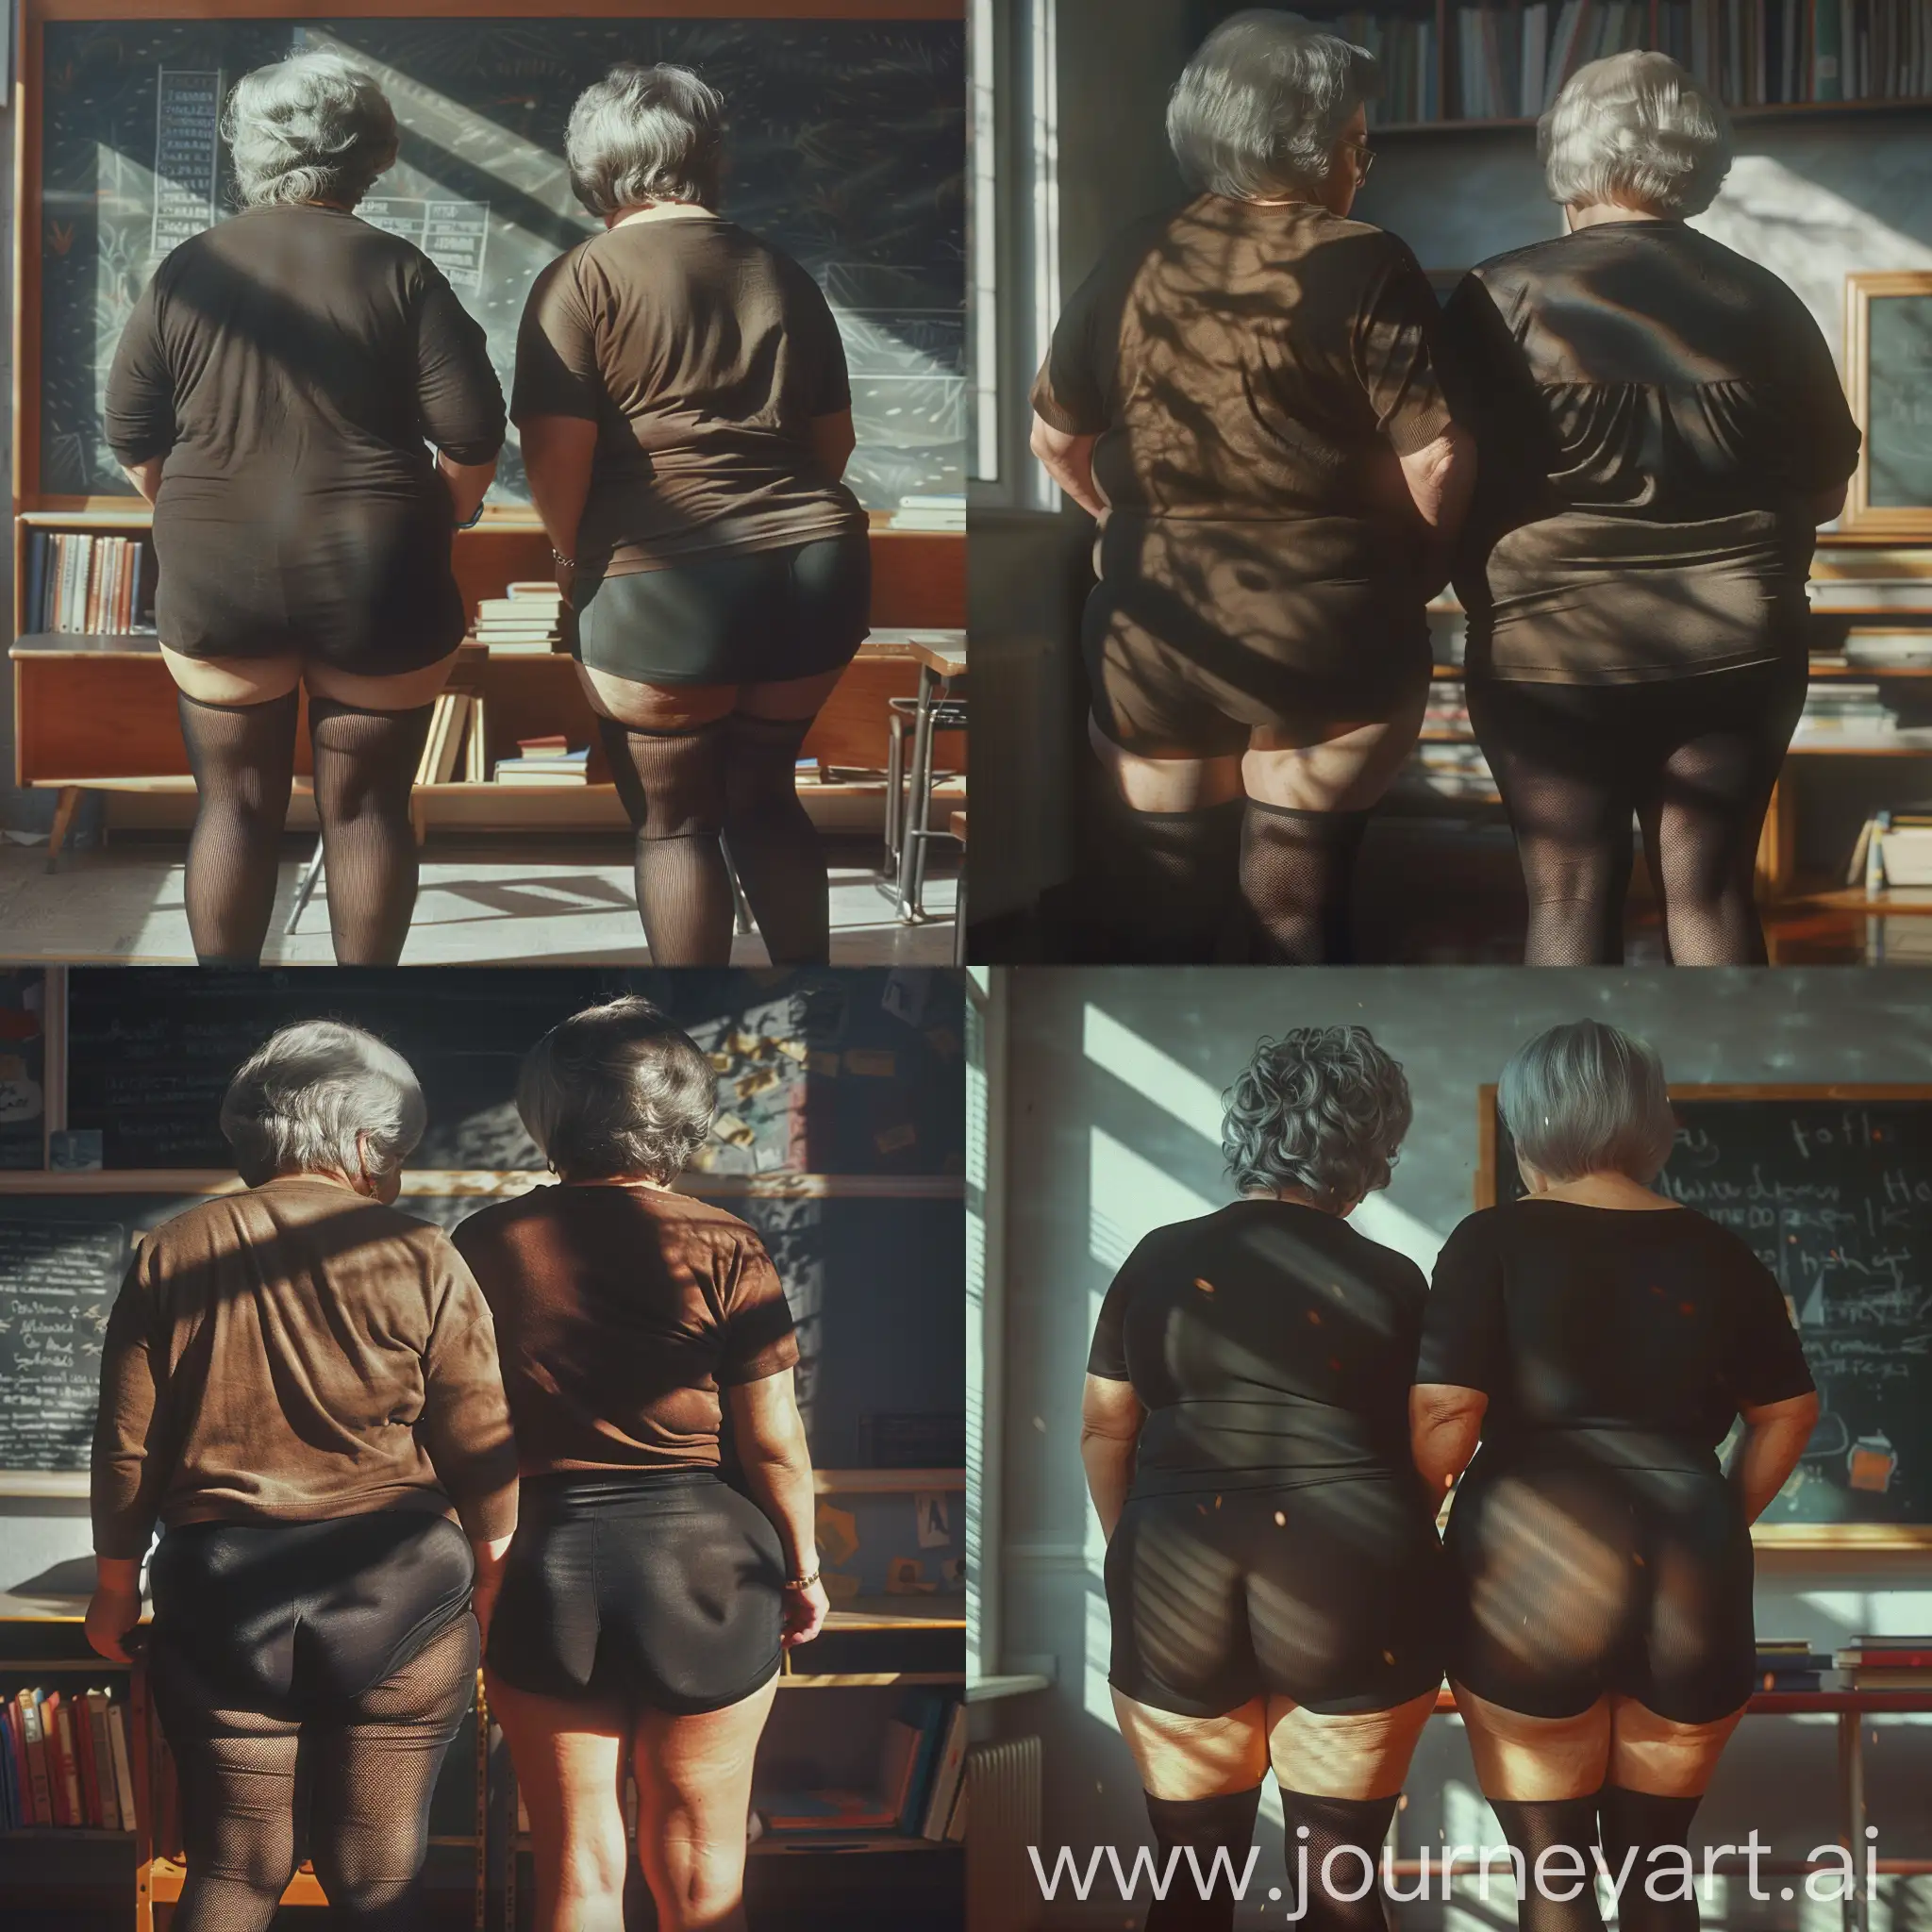 Retro 1970s frame, realism, high quality details. A shot from a real movie. Two extremely fat 50-year-old women stand in close-up and teach in a classroom, rear view. Short gray hair. Shadows fall everywhere, creating an interesting atmosphere, books and a blackboard. Black nylon tights and a T-shirt.